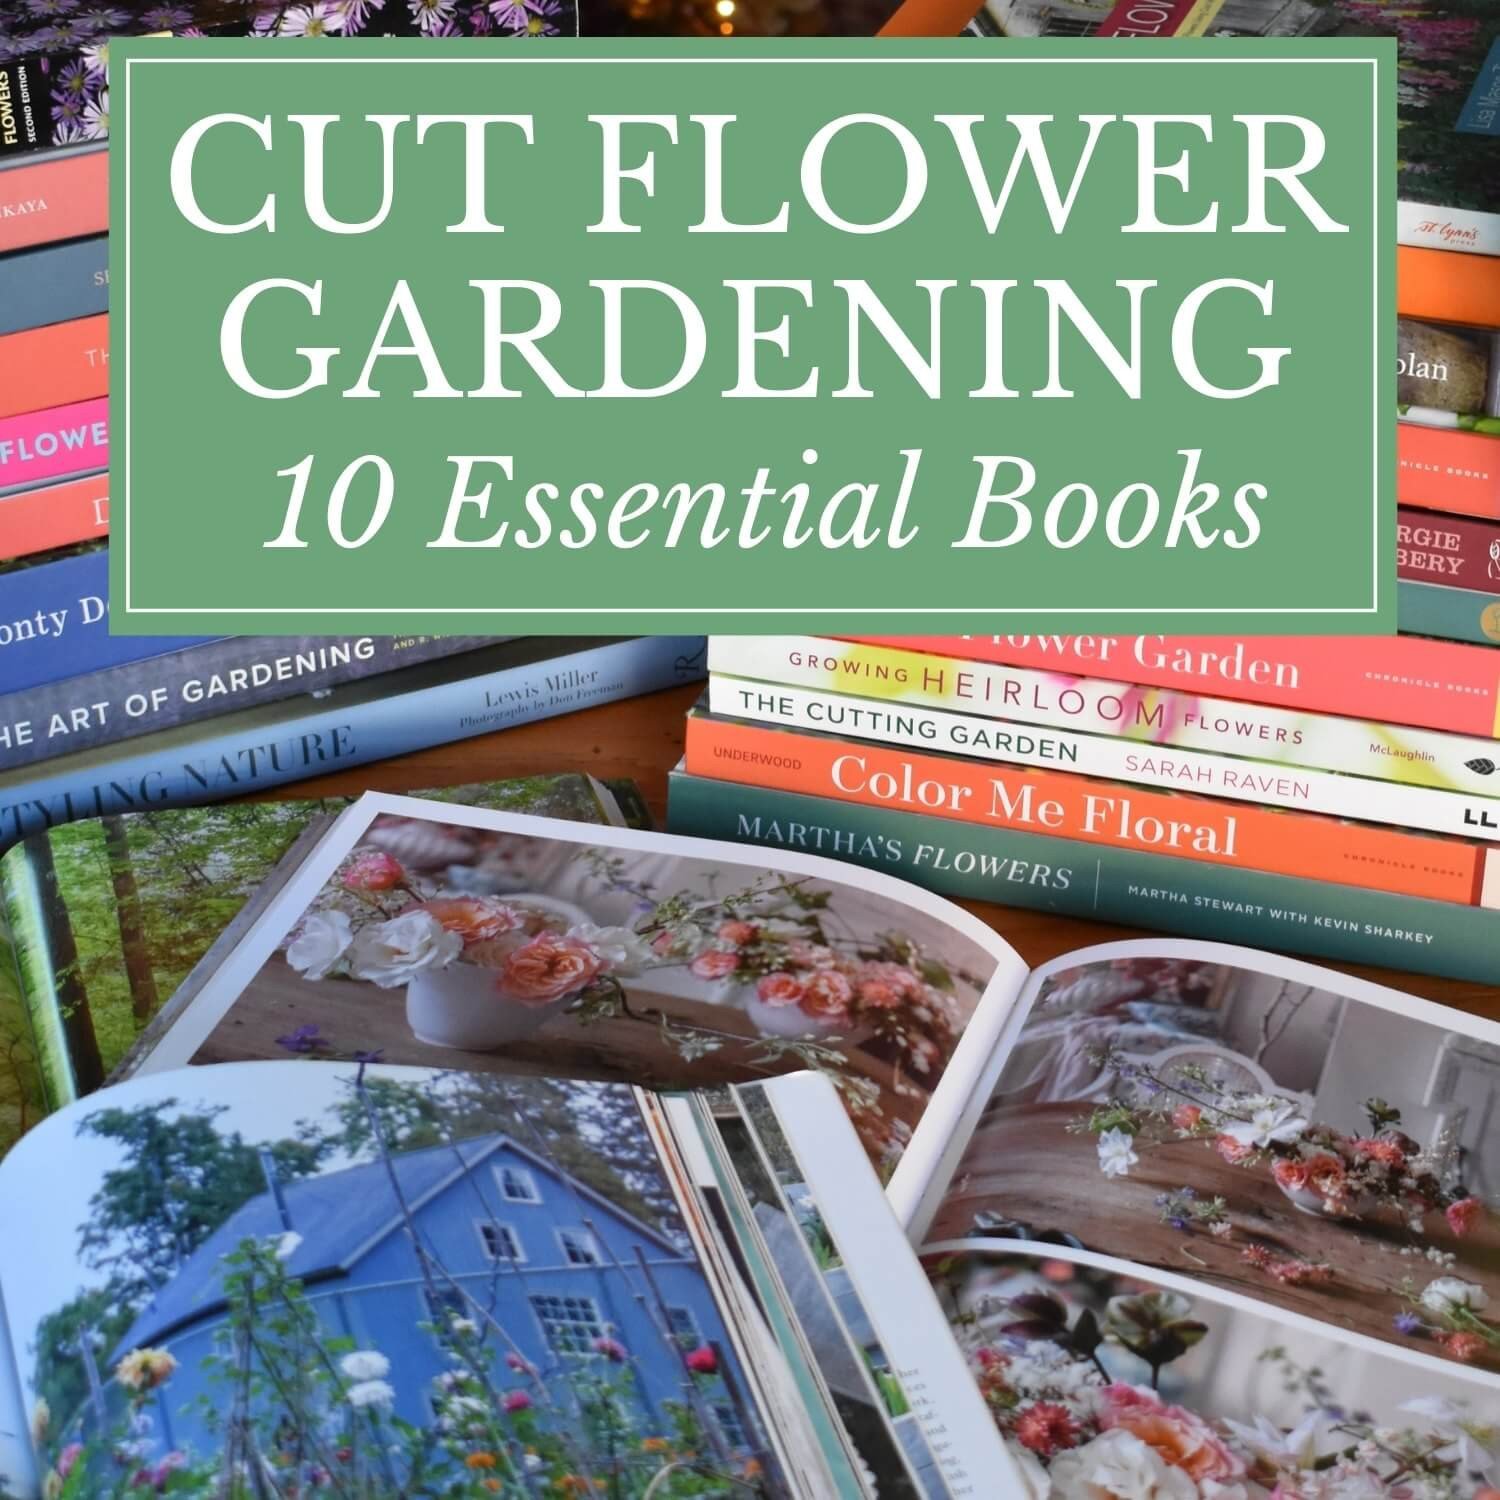 New Gardening Books for the Creative Spirit : Cocoa With Books